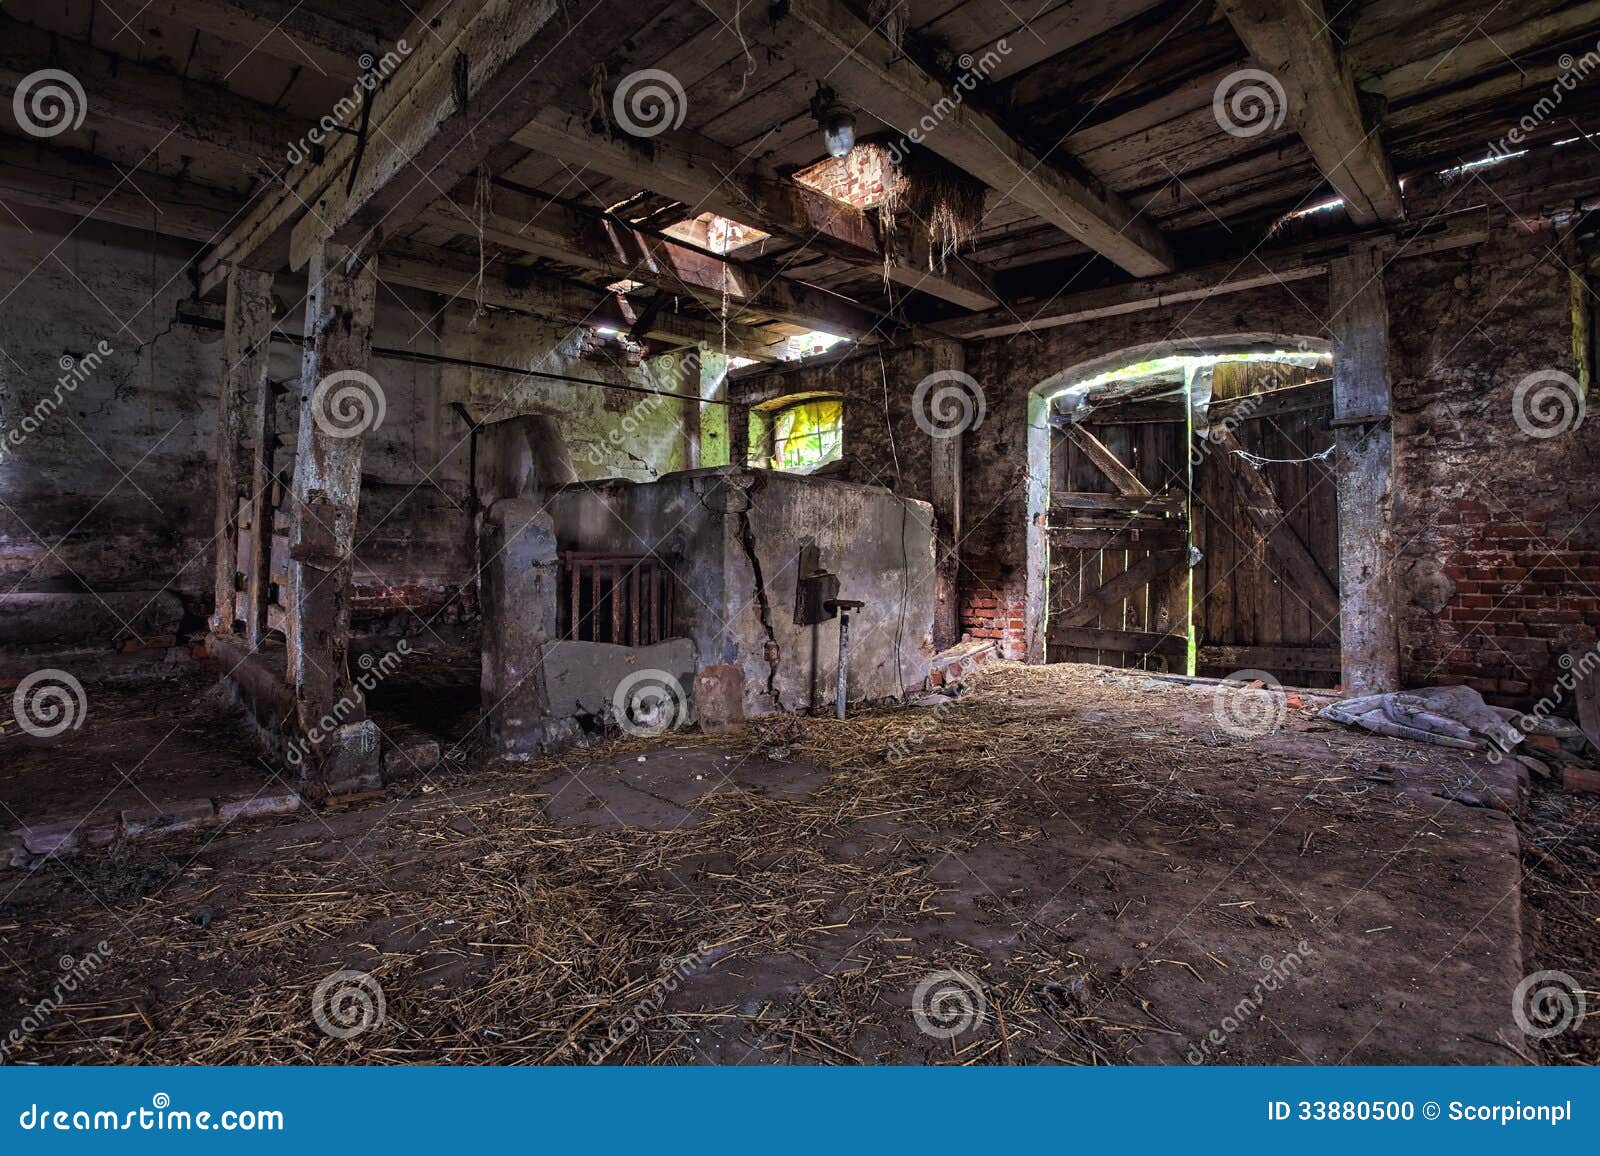 Interior Of An Old, Decaying Barn. Stock Photo - Image ...